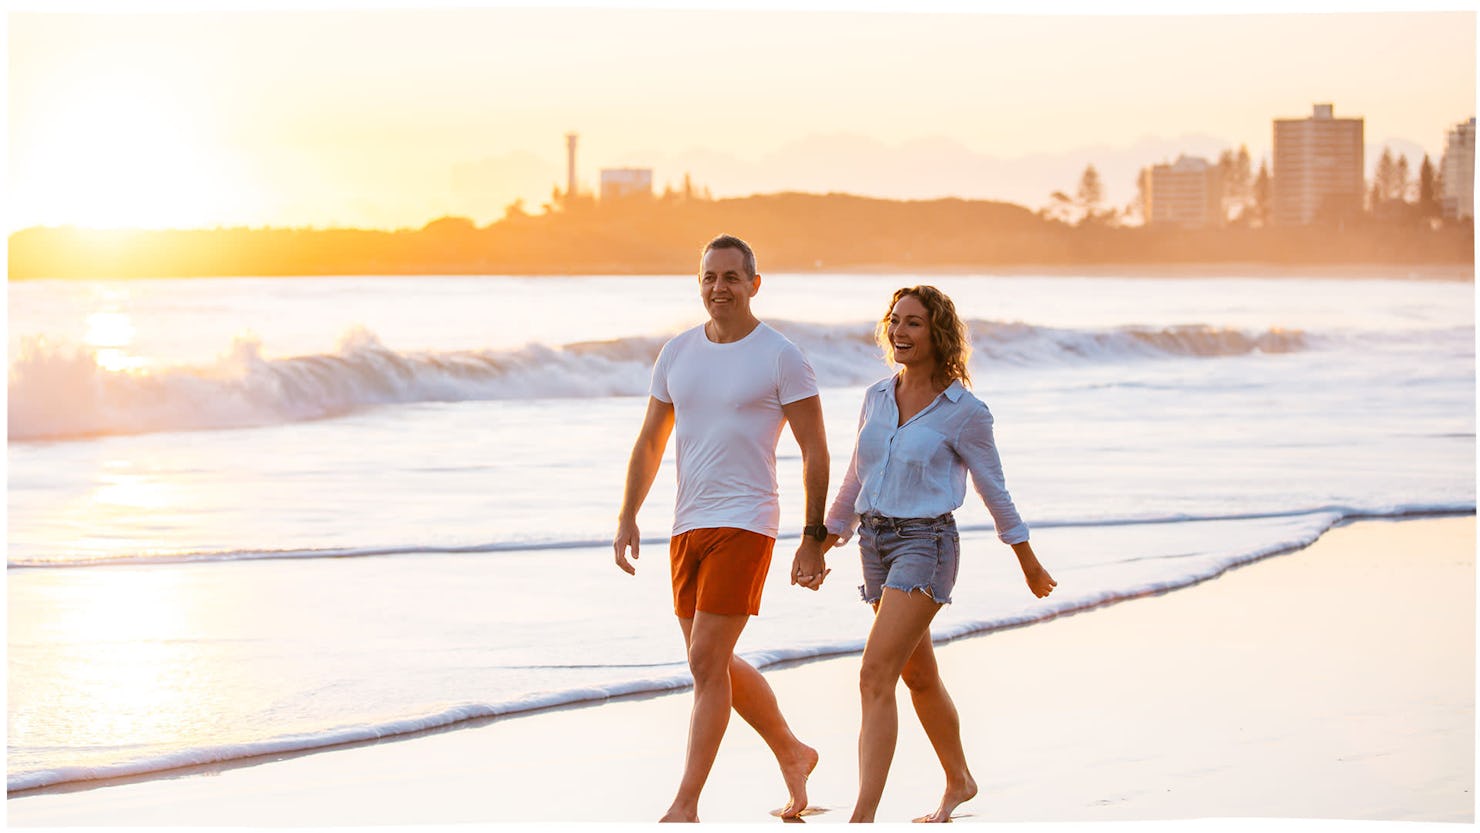 Things to do on your Mooloolaba beach break